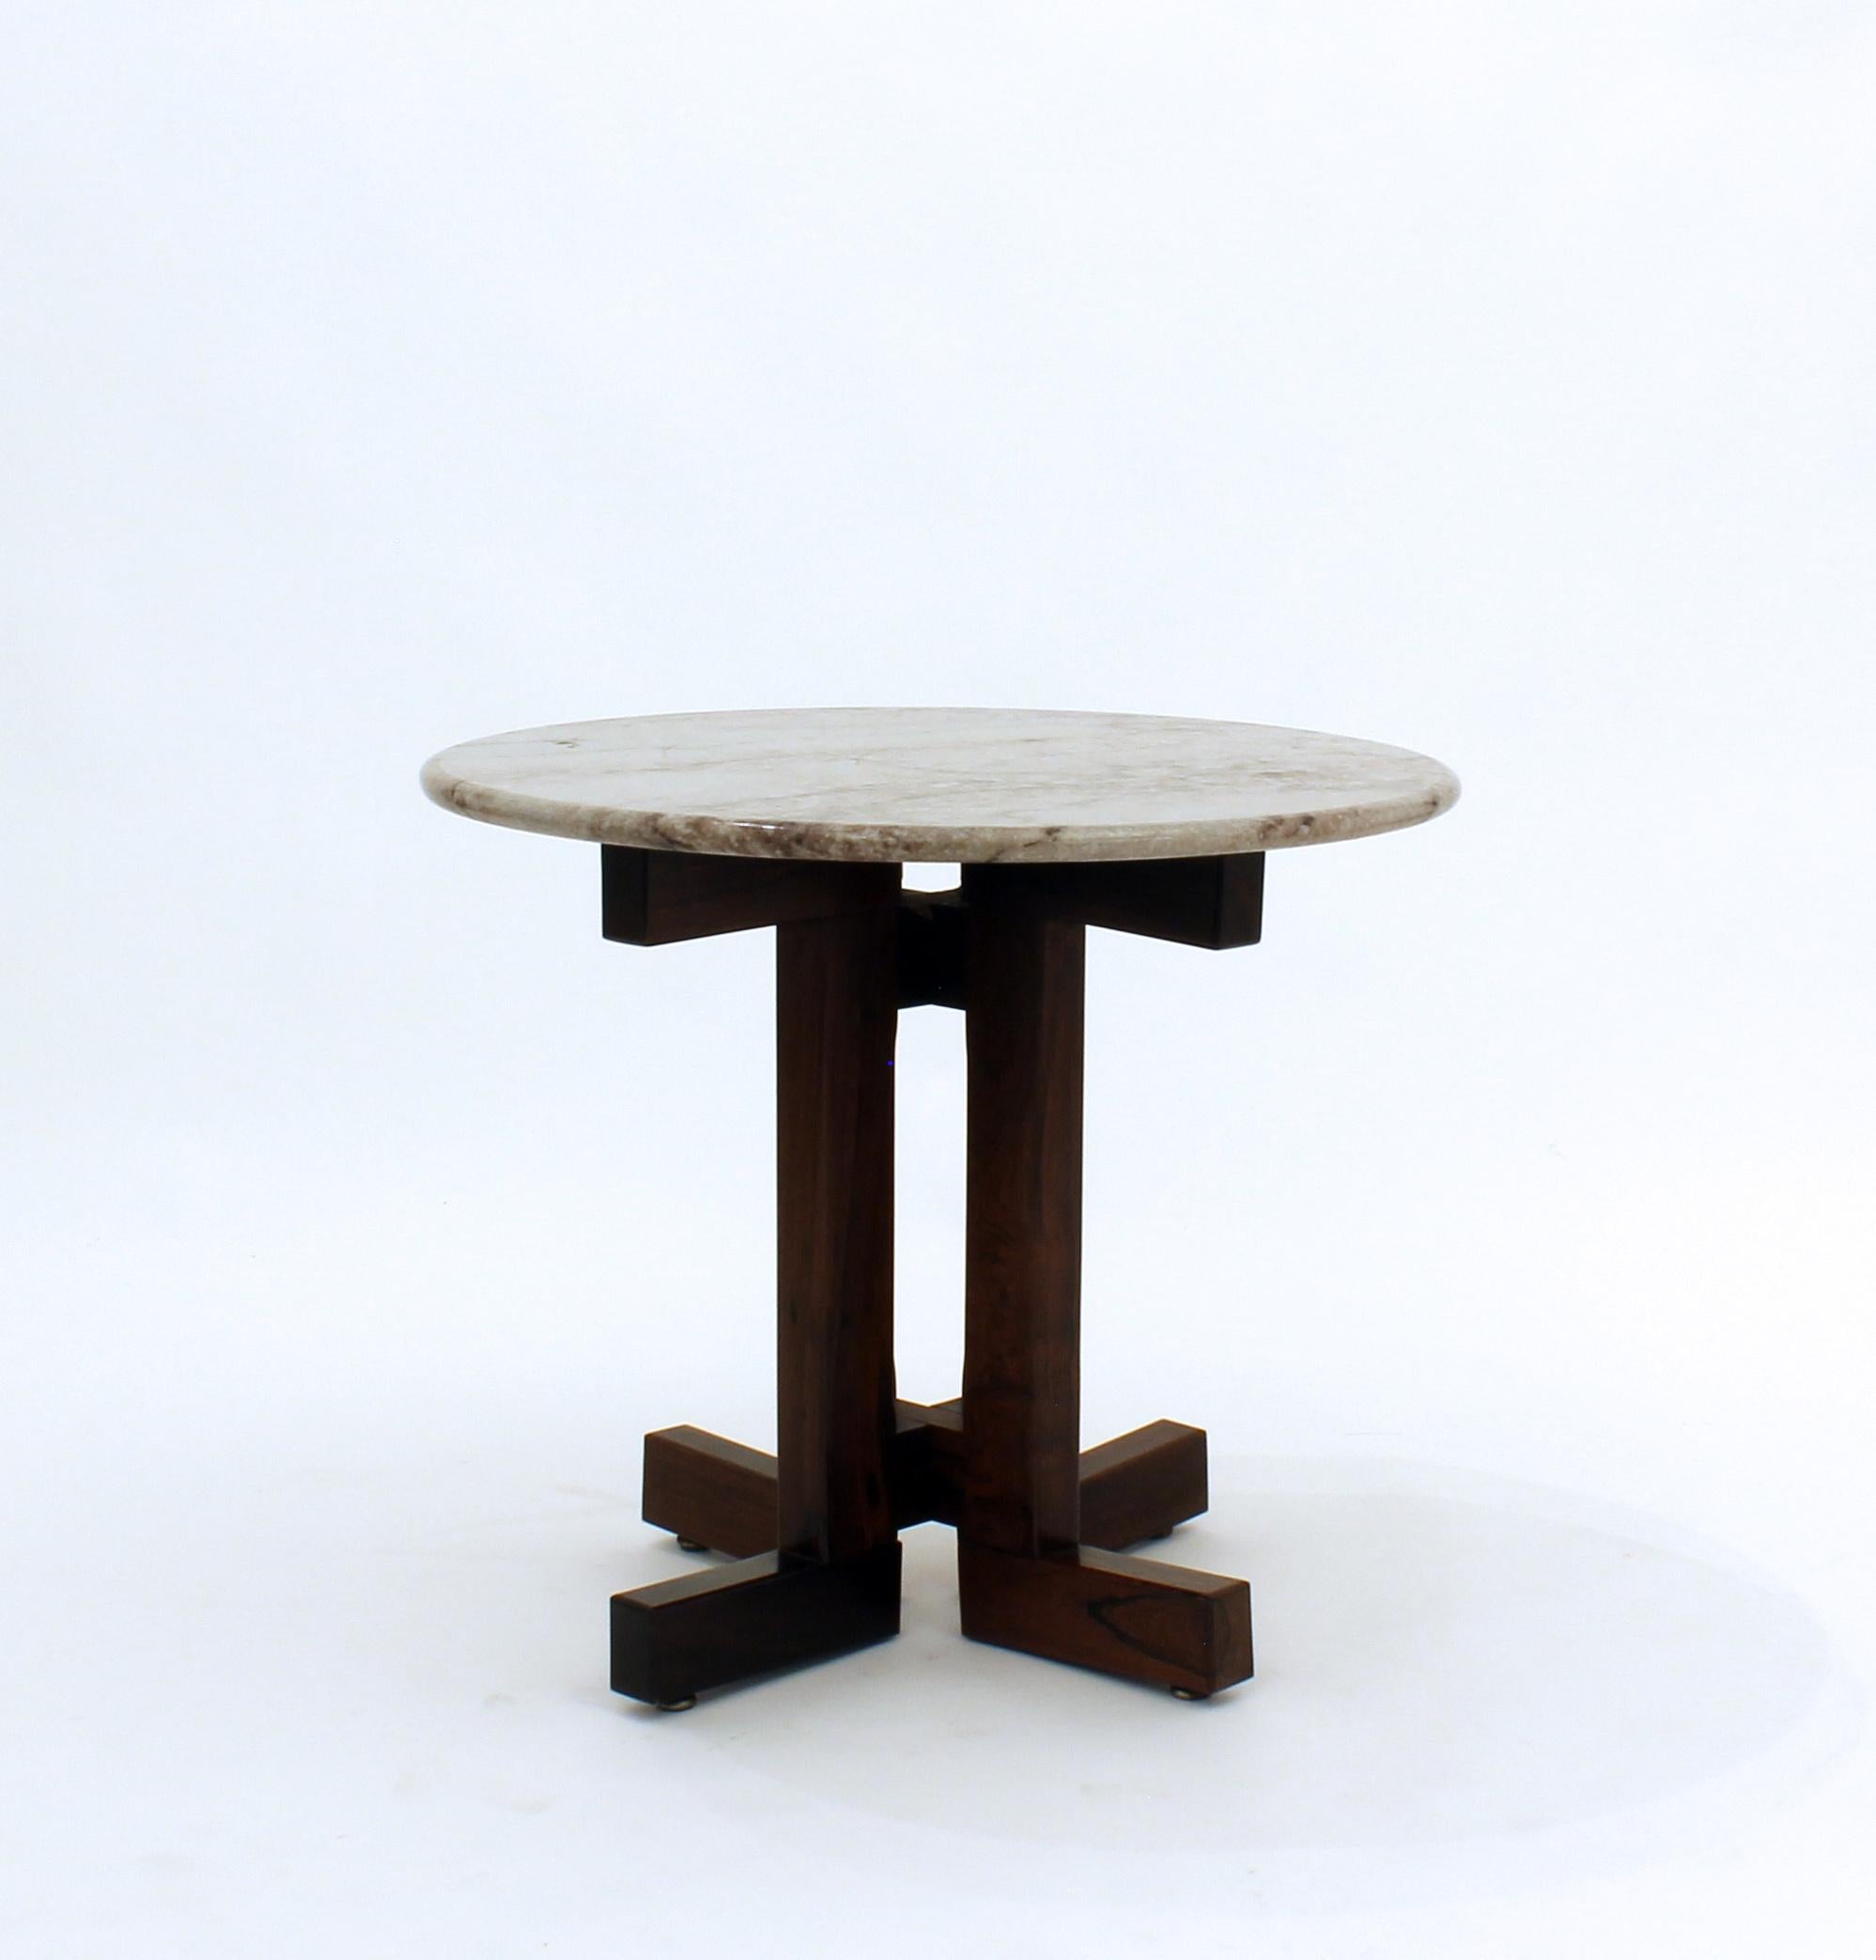 Elegant and sophisticated vintage side table by Brazilian company Celina Decorações. Modern lines with rich high quality Brazilian wood and marble give this small table a significant yet subtle presence. Contains manufacturer's original label